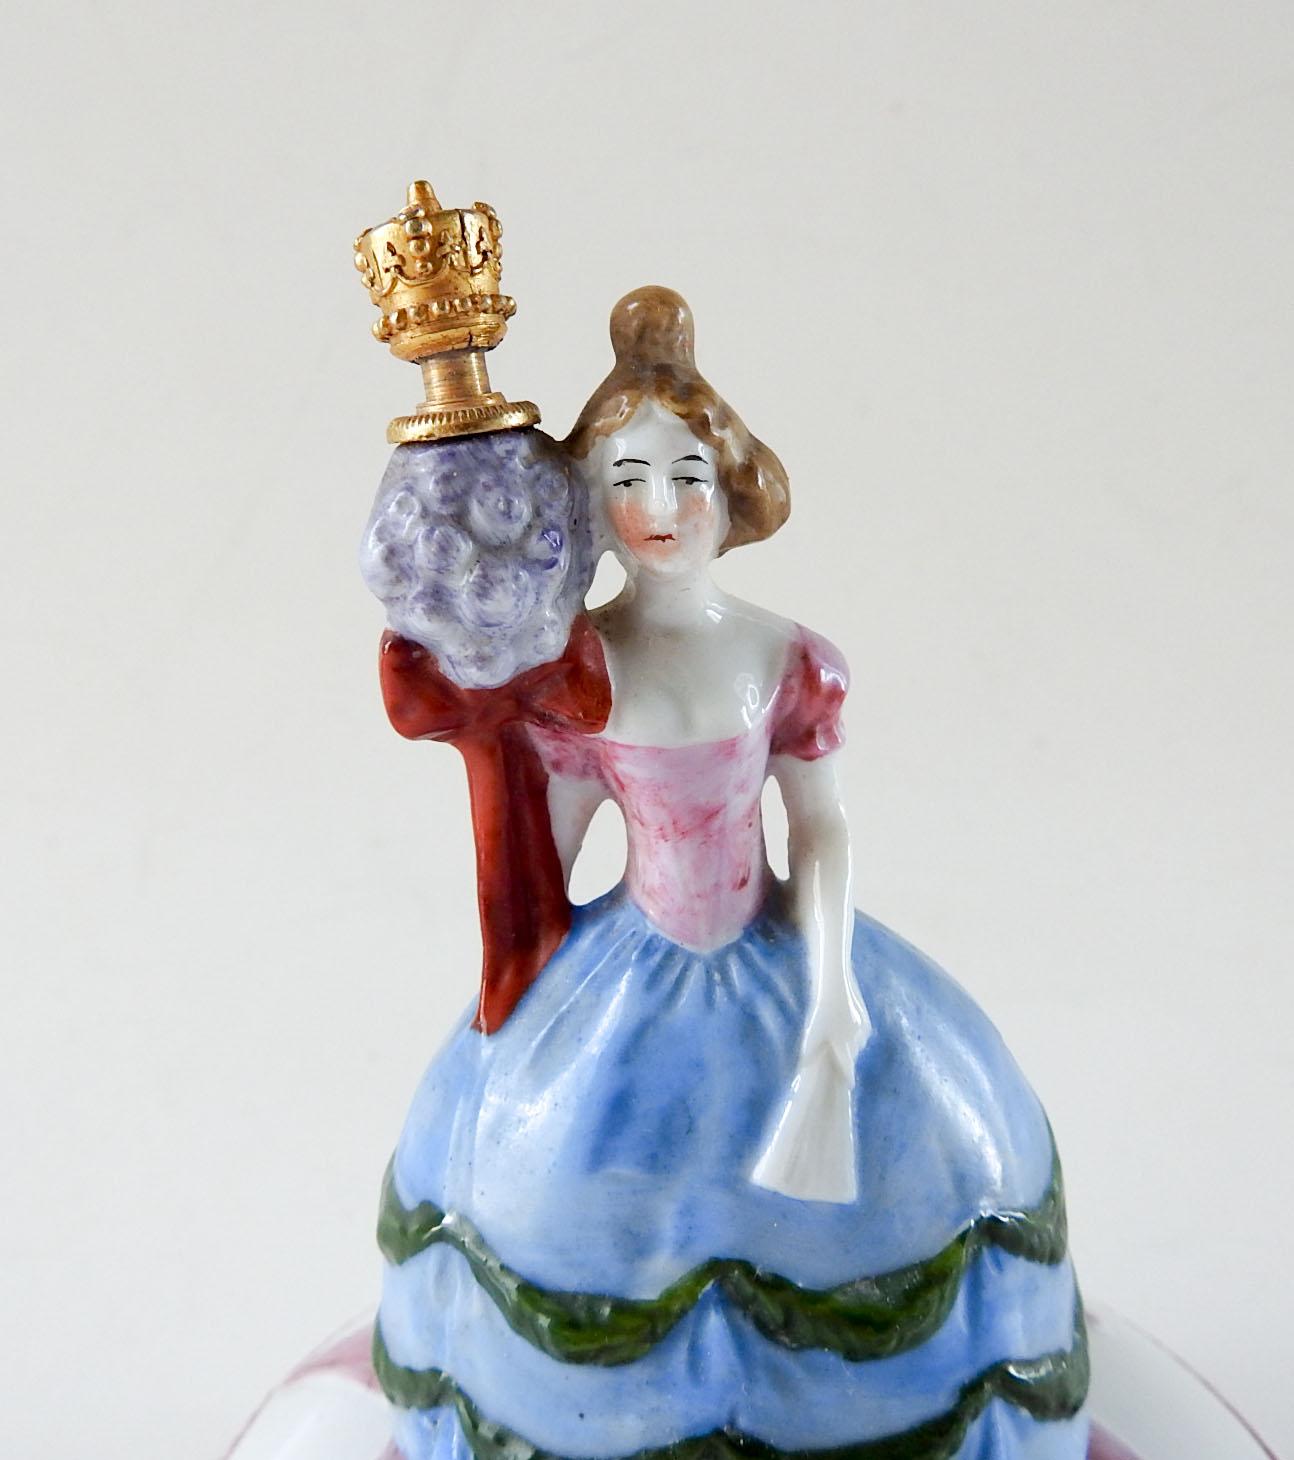 Circa 1920's porcelain trinket box combined with perfume bottle.  Marked  Sitzendorf Germany on bottom.  Perfume stopper is brass crown, figure is woman in 18th century costume.  Very good condition.